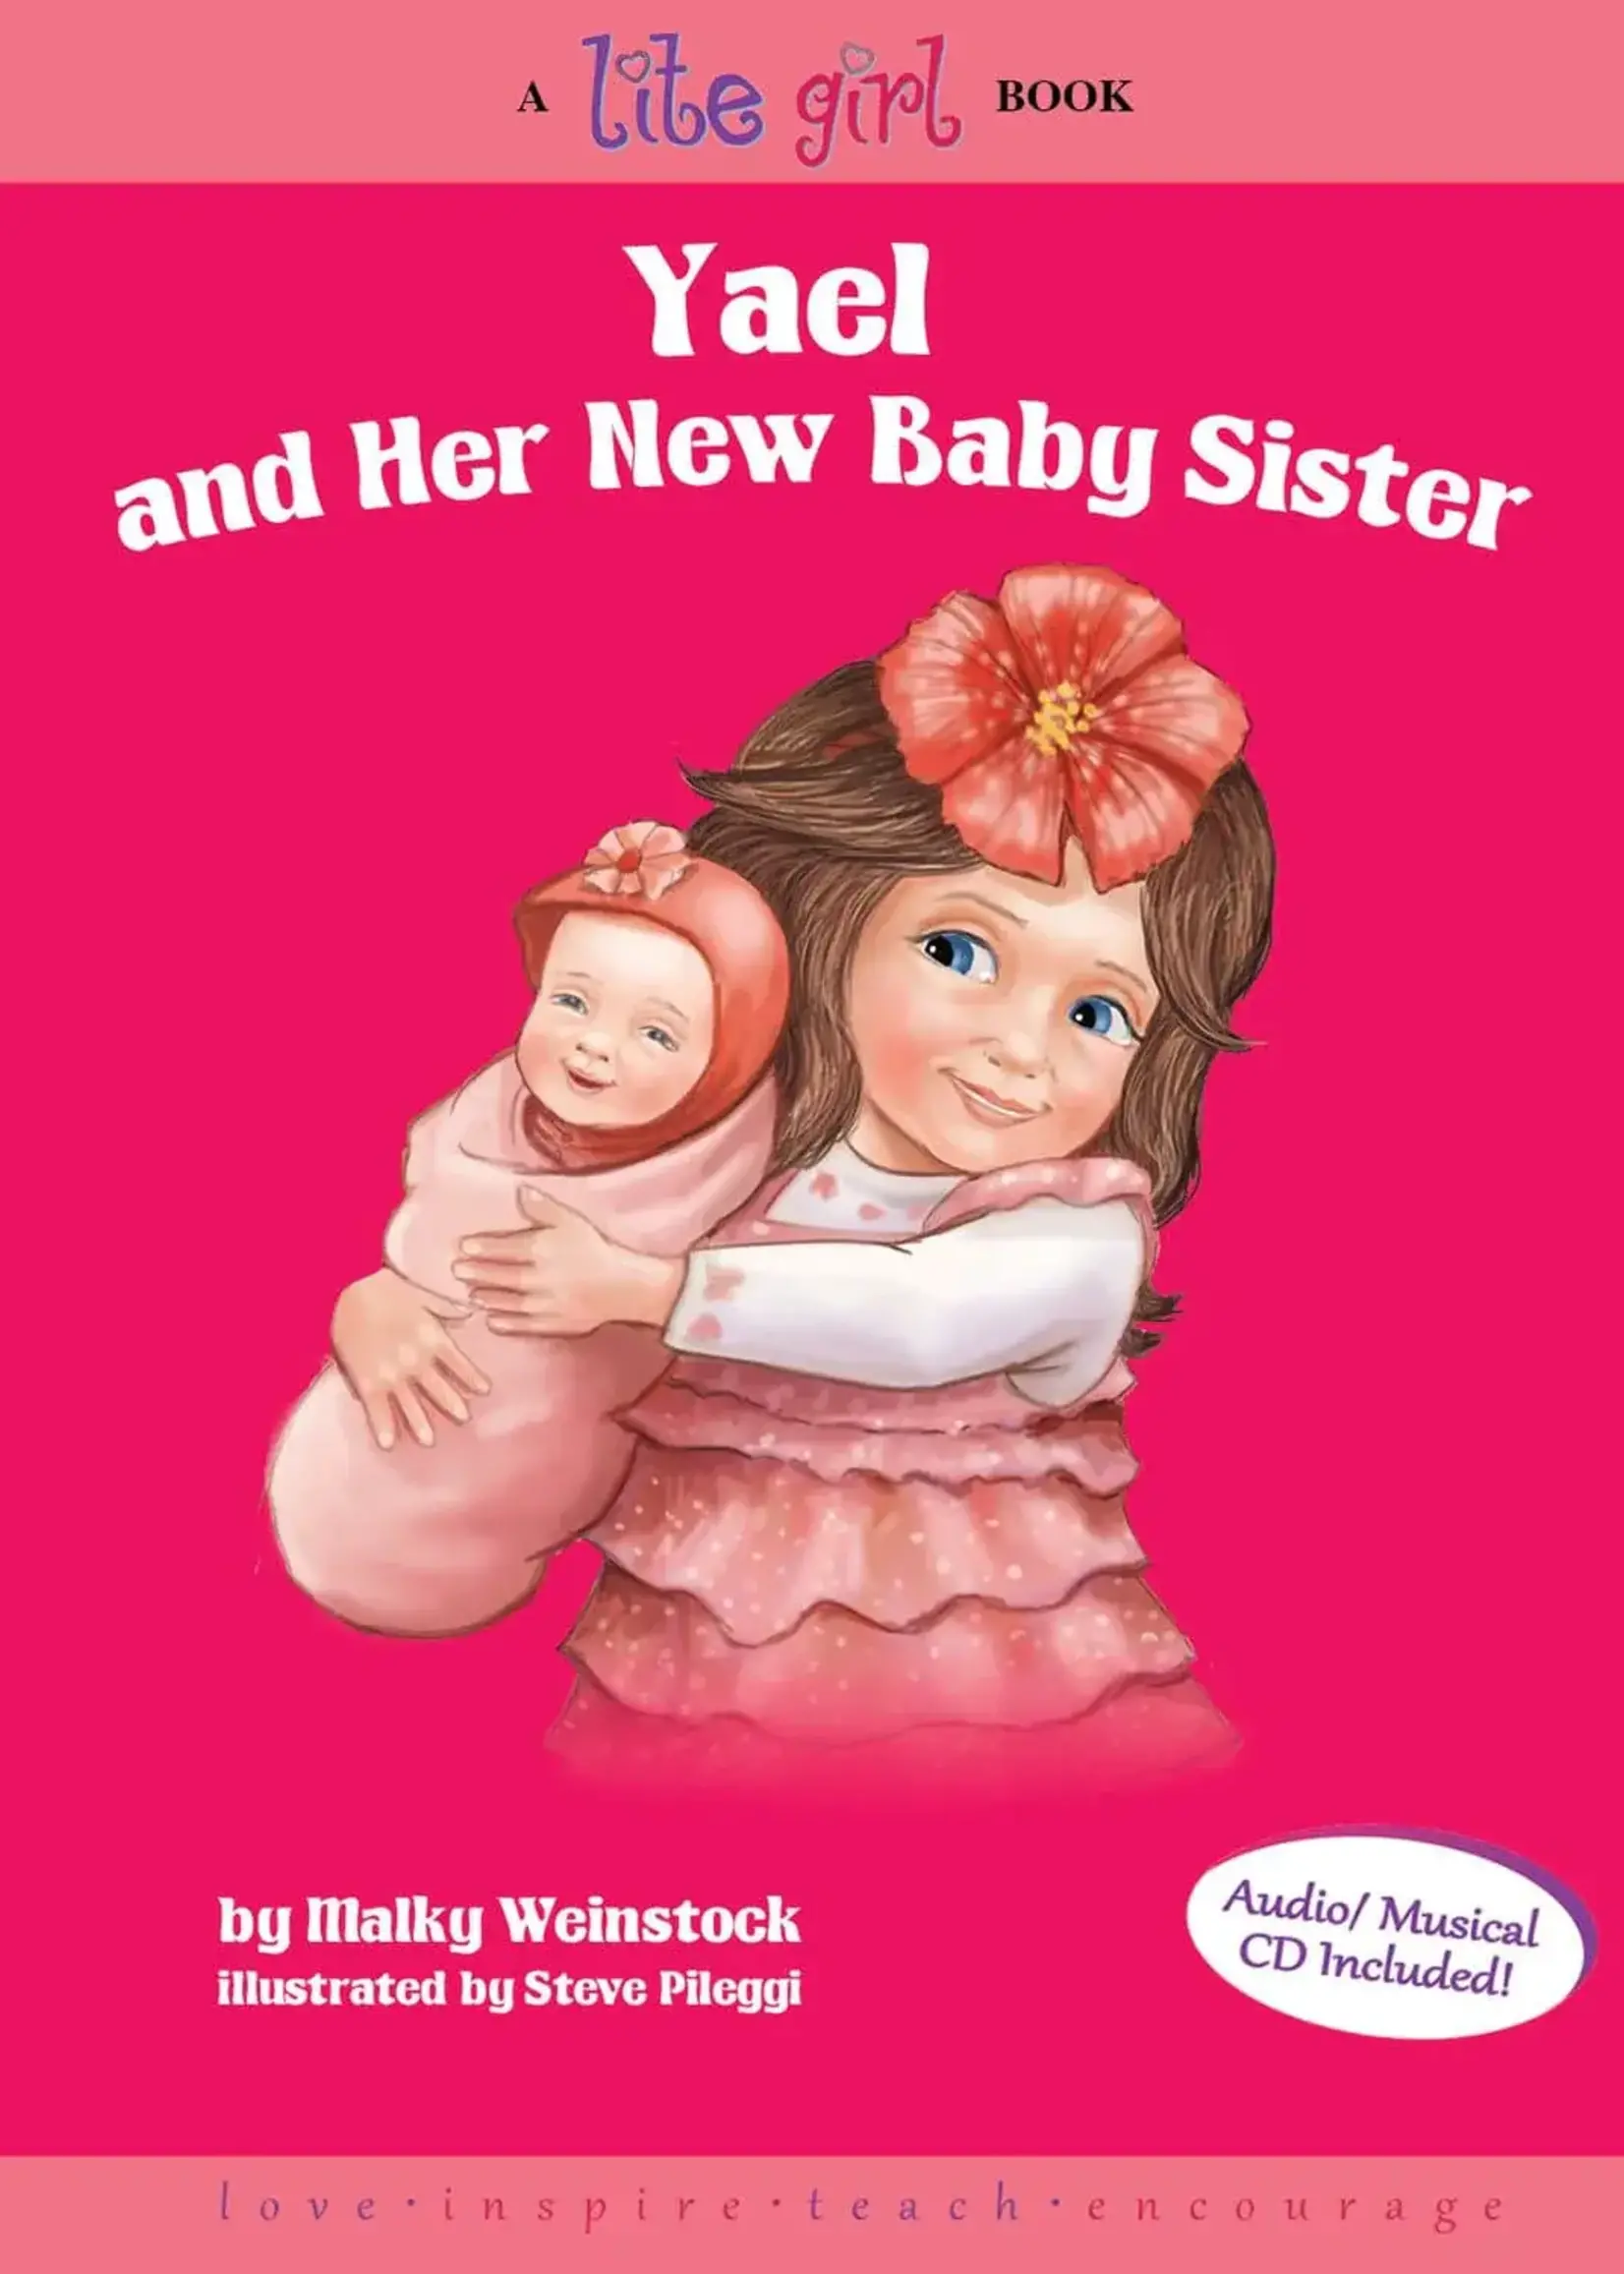 Malky Weinstock Yael and Her New Baby Sister (#6)